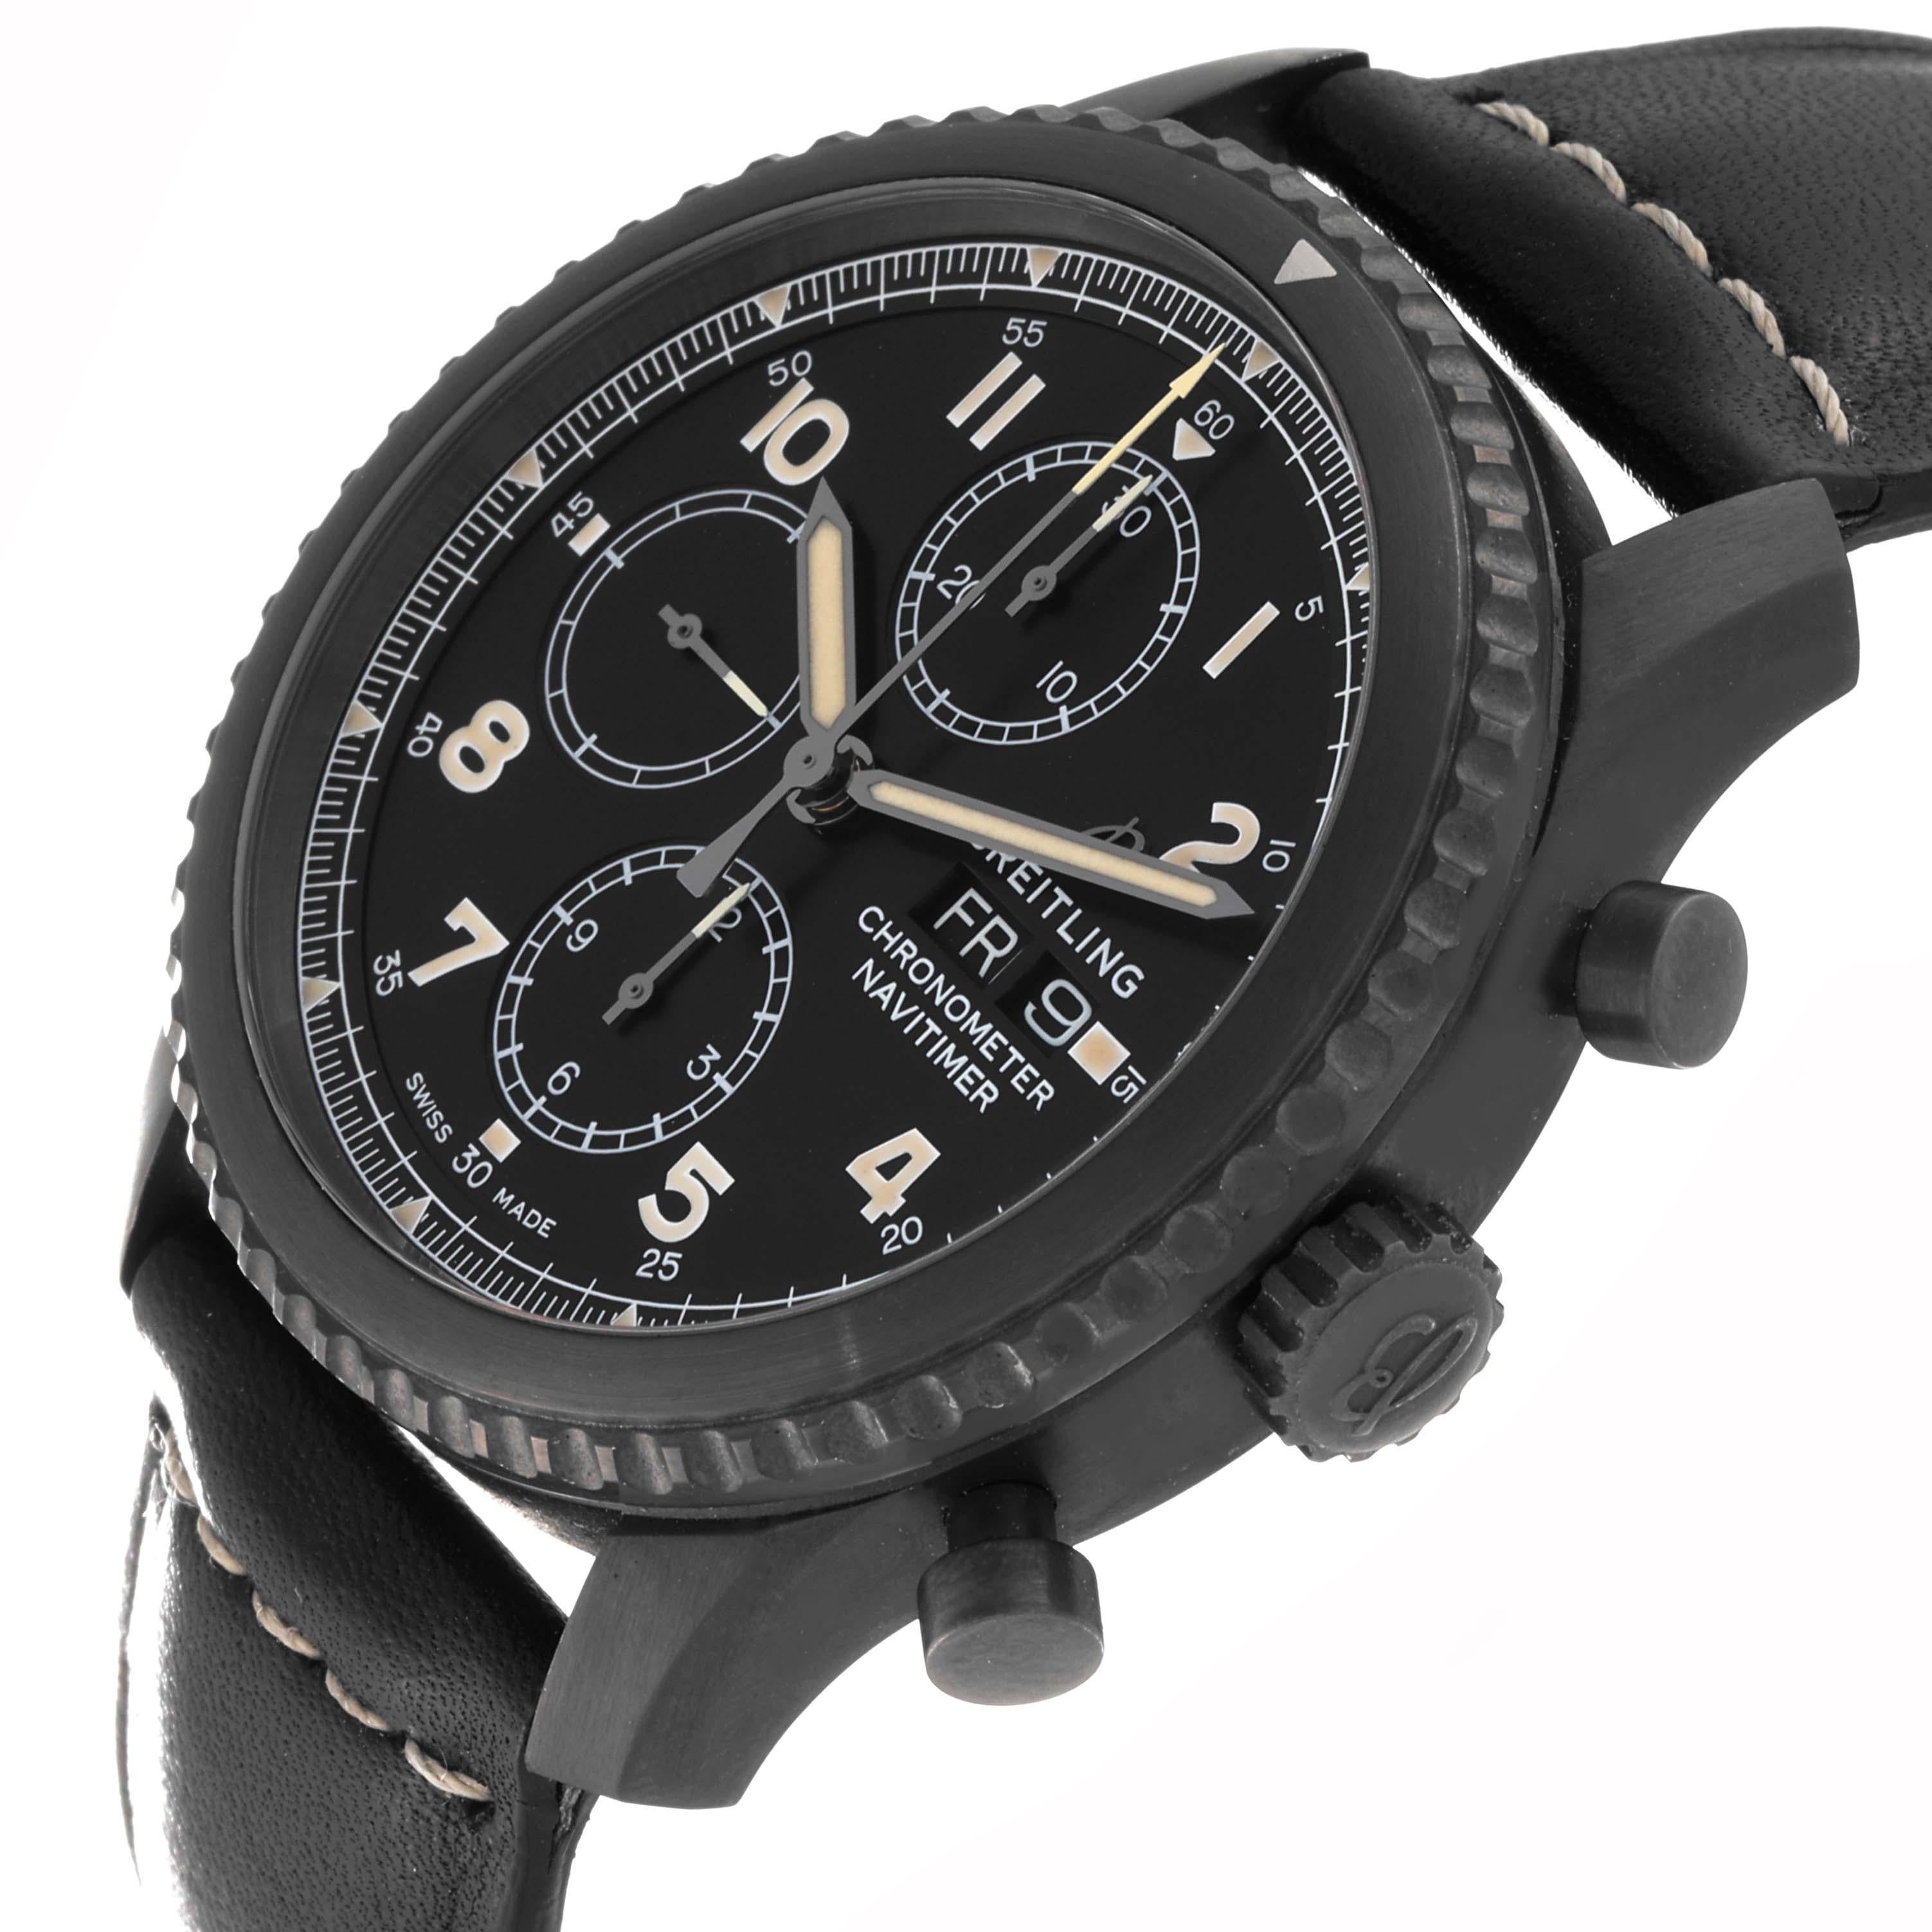 Breitling Navitimer 8 Chronograph 43 DLC Steel Mens Watch M13314 Box Card. Automatic self-winding movement. DLC-coated stainless steel case 43 mm in diameter and 14 mm in thickness. Screwed-down crown. Lapidated lugs. Black bidirectional rotating